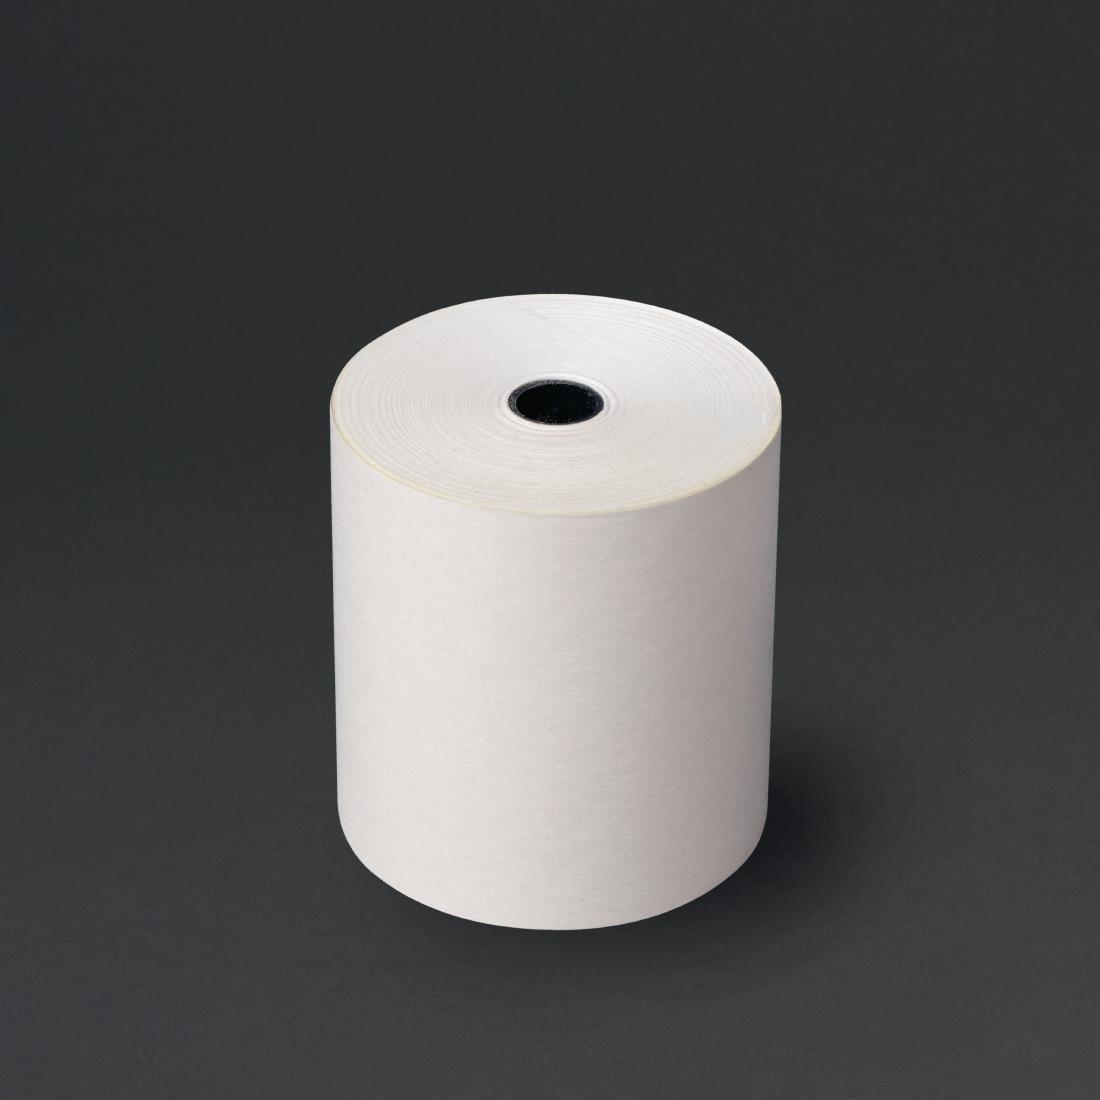 Fiesta Non-Thermal 2ply White and Yellow Till Roll 76 x 70mm (Pack of 20) - DK596  - 2